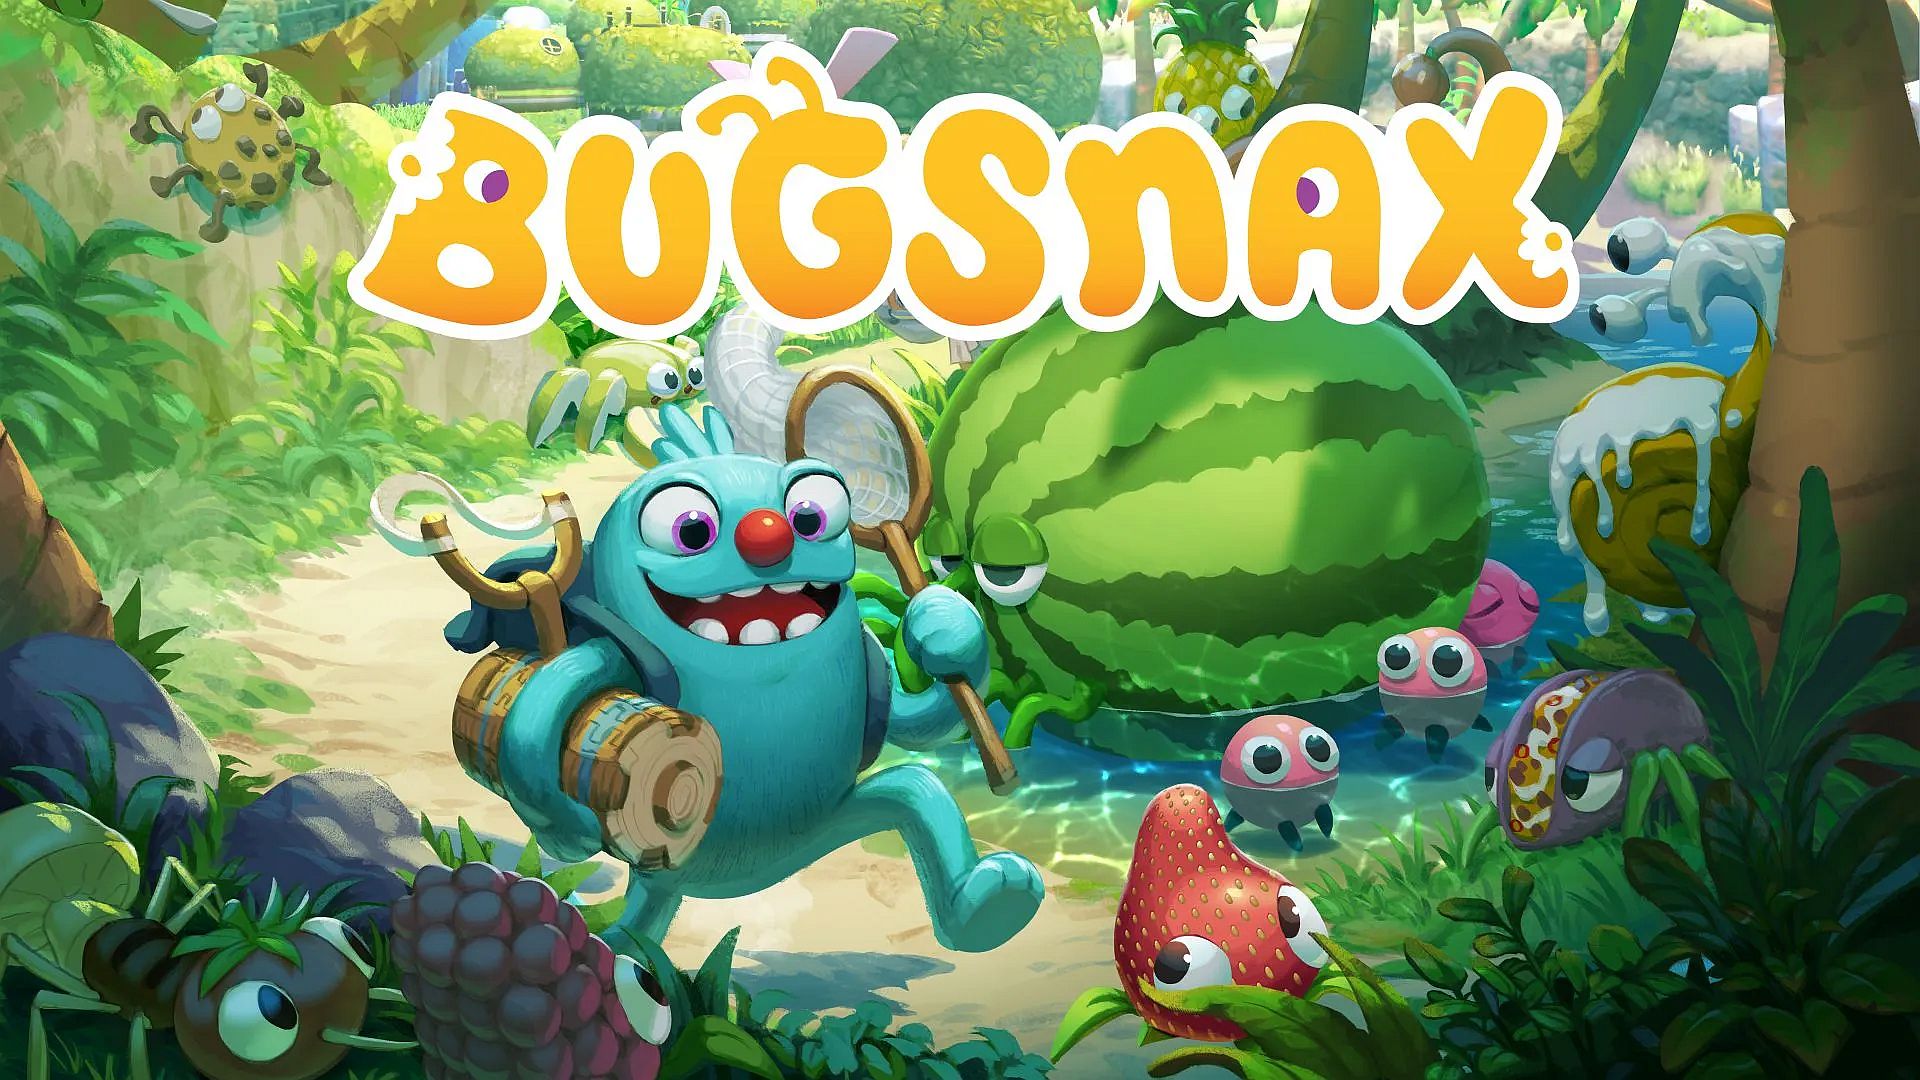 Image for Bugsnax is coming to Steam, Switch, and Xbox Game Pass later this month alongside free DLC